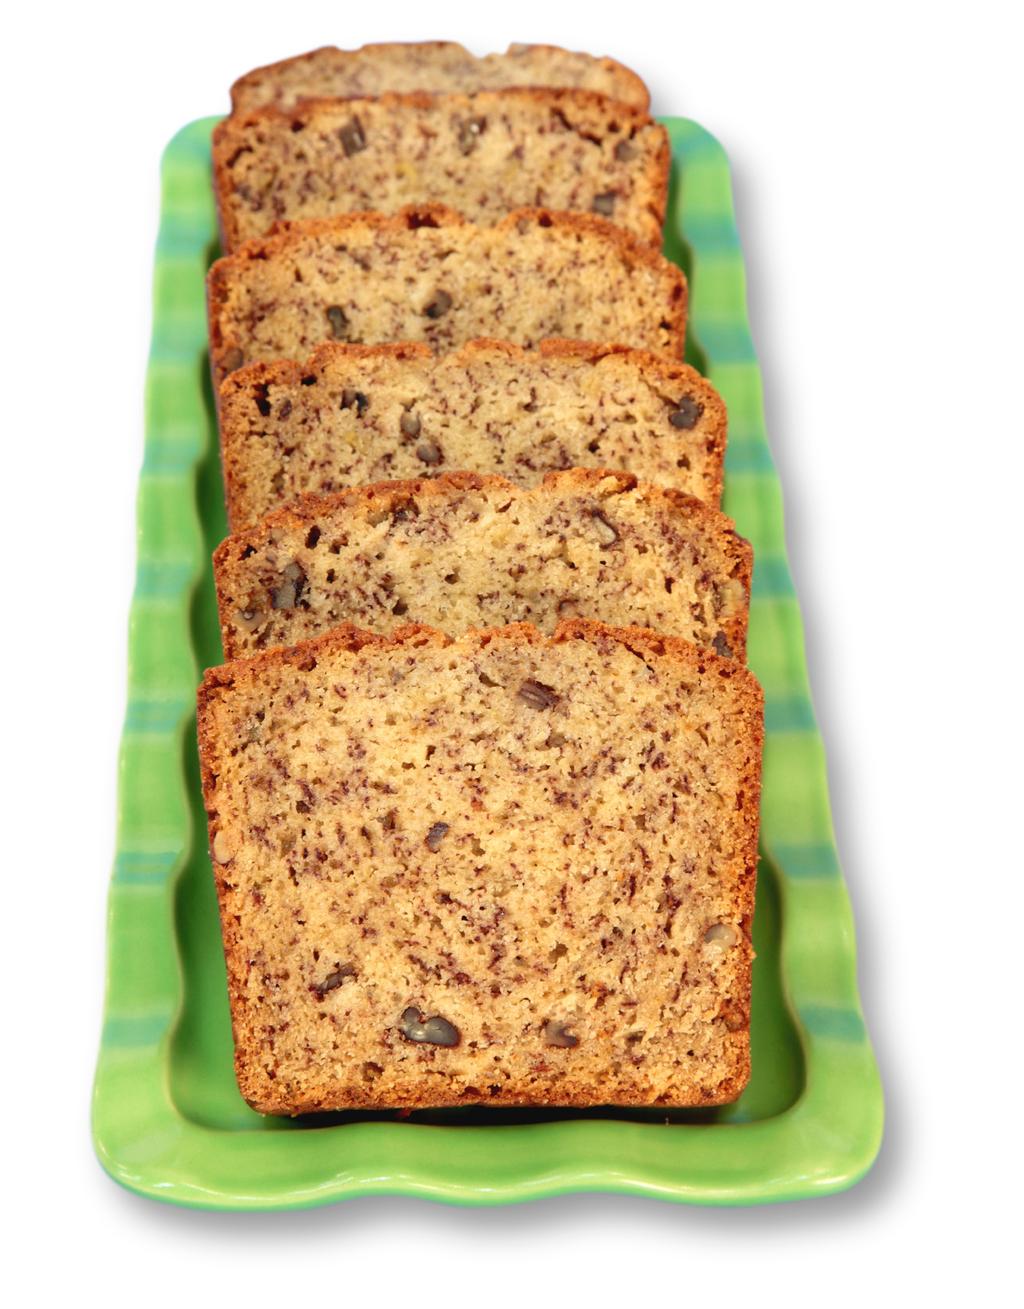 BANANA BREAD > BANANA BREAD > Banana Bread Preparation Time: 10 minutes Bake Time: 1 hour 20 minutes Serving Size: 16 slices ½ cup Butter ¾ cup Sugar 2 Eggs 1 tsp Vanilla 3 Bananas, large, mashed 2